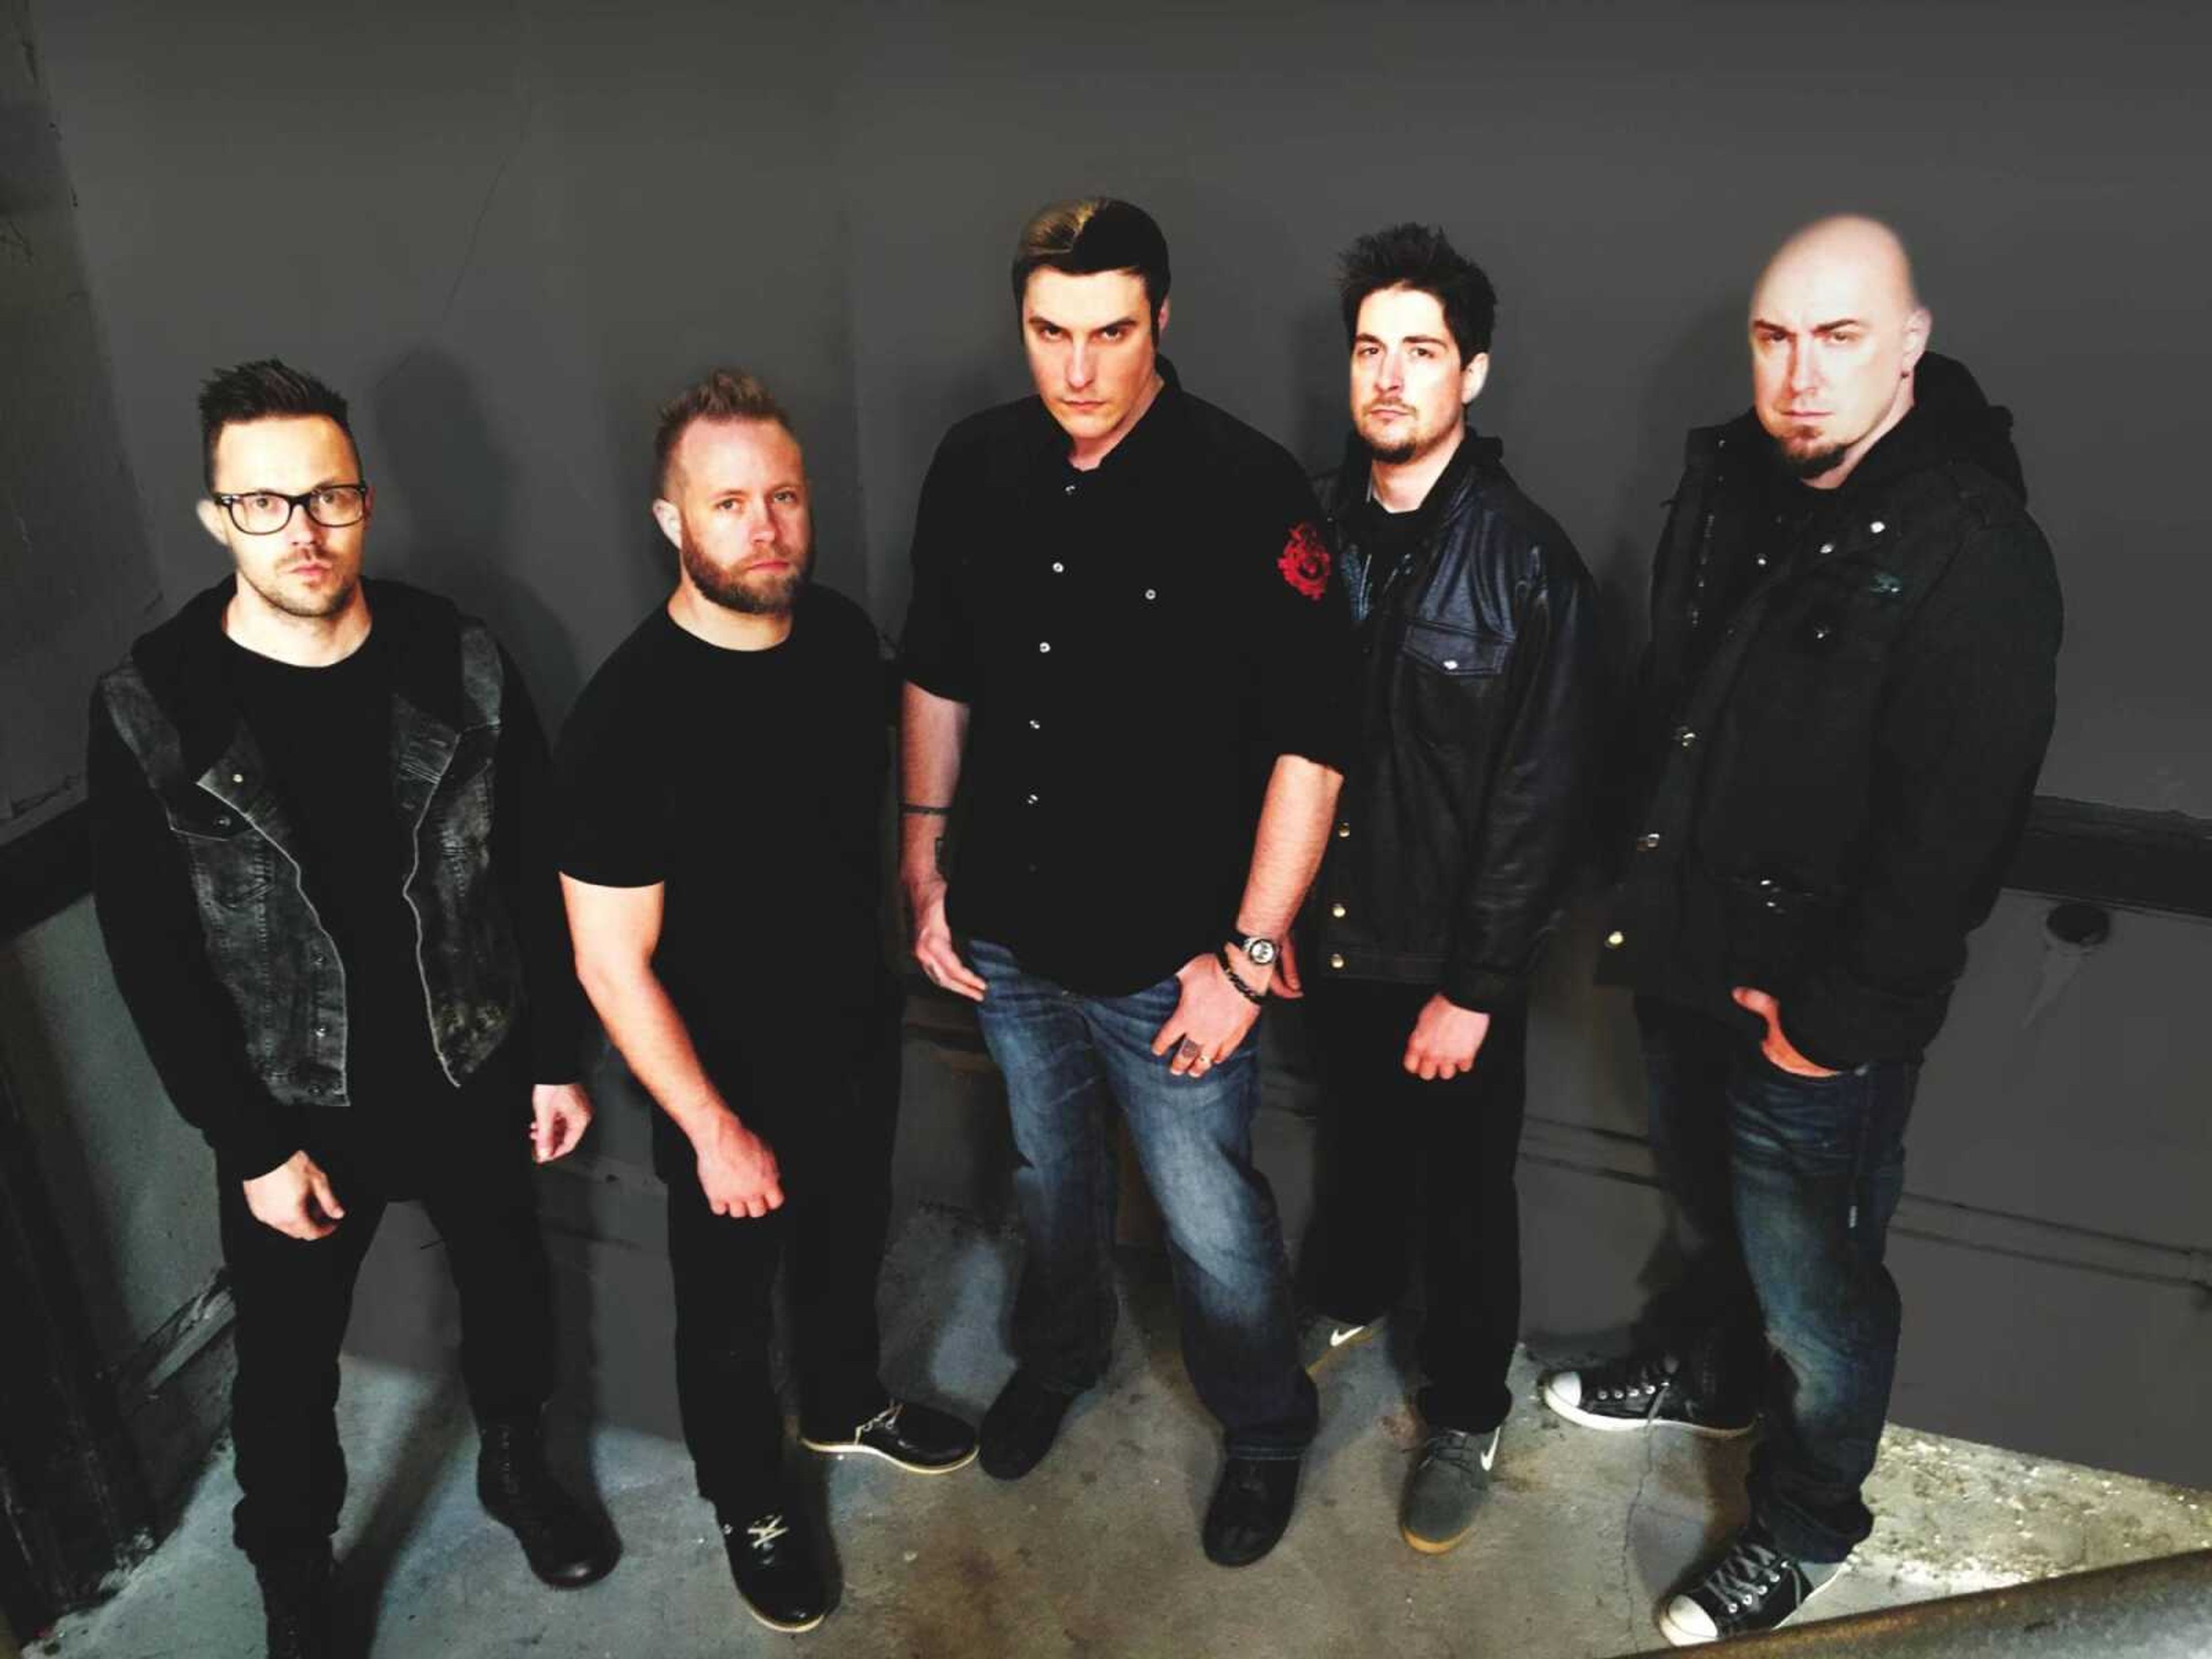 Breaking Benjamin, above, will appear in concert with Shinedown and special guest Sevendust at 7 p.m. Nov. 15 at the Show Me Center.